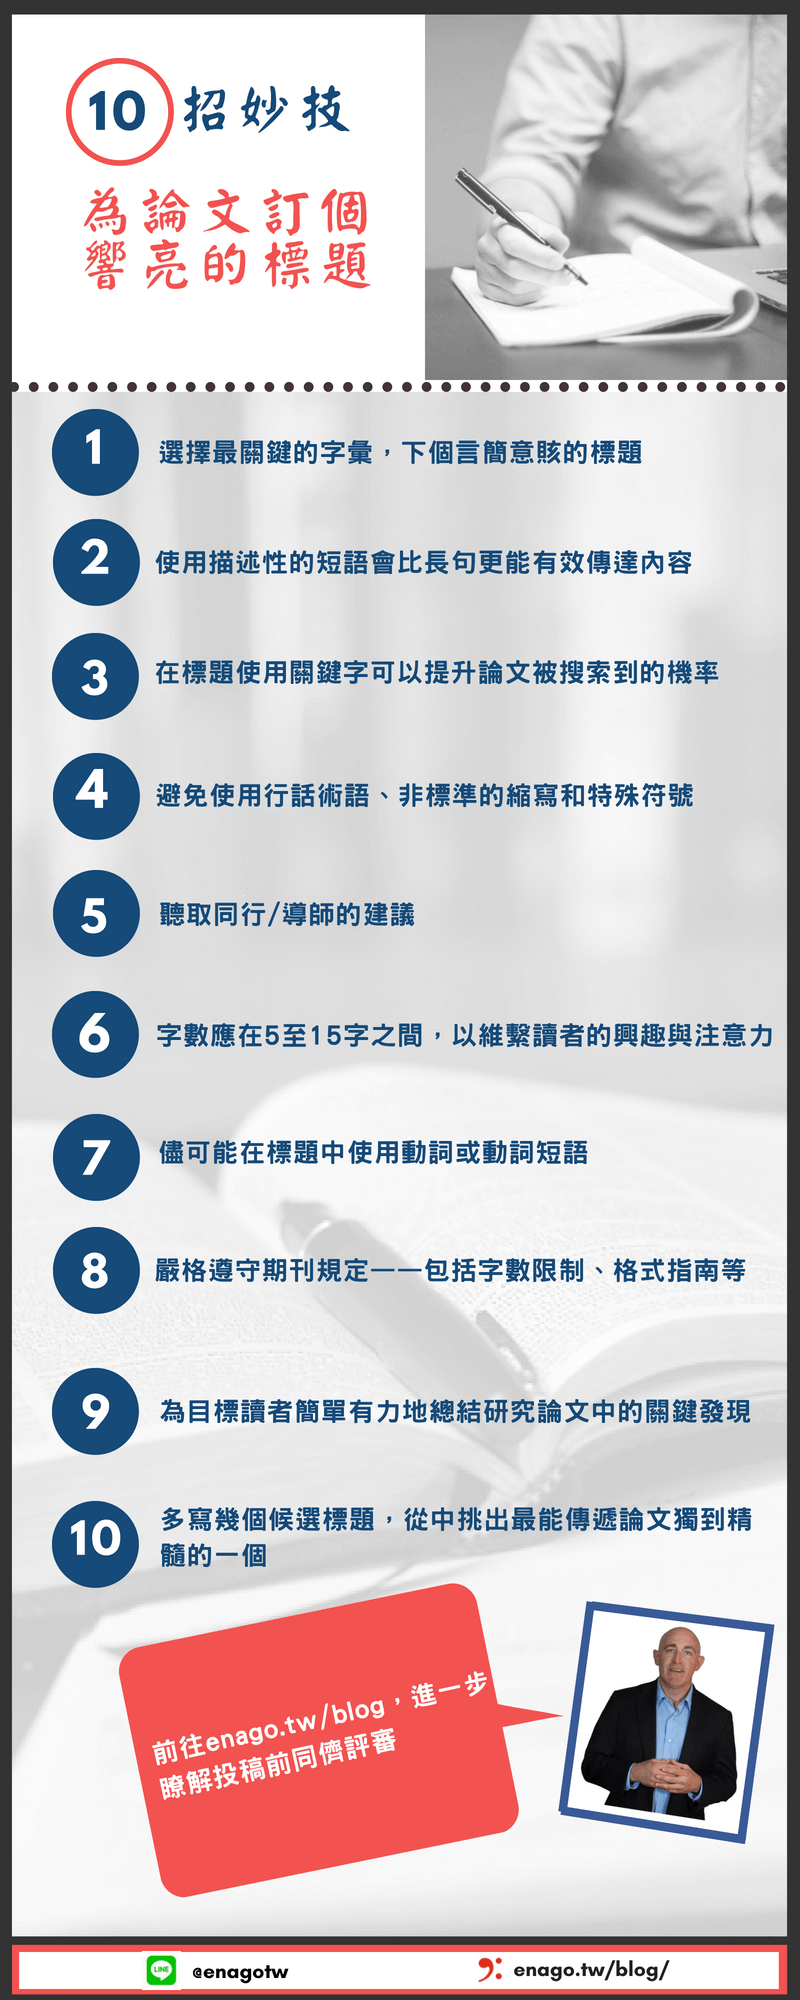 Top 10 Tips on Choosing an Attractive Research Title_Taiwan_Translated